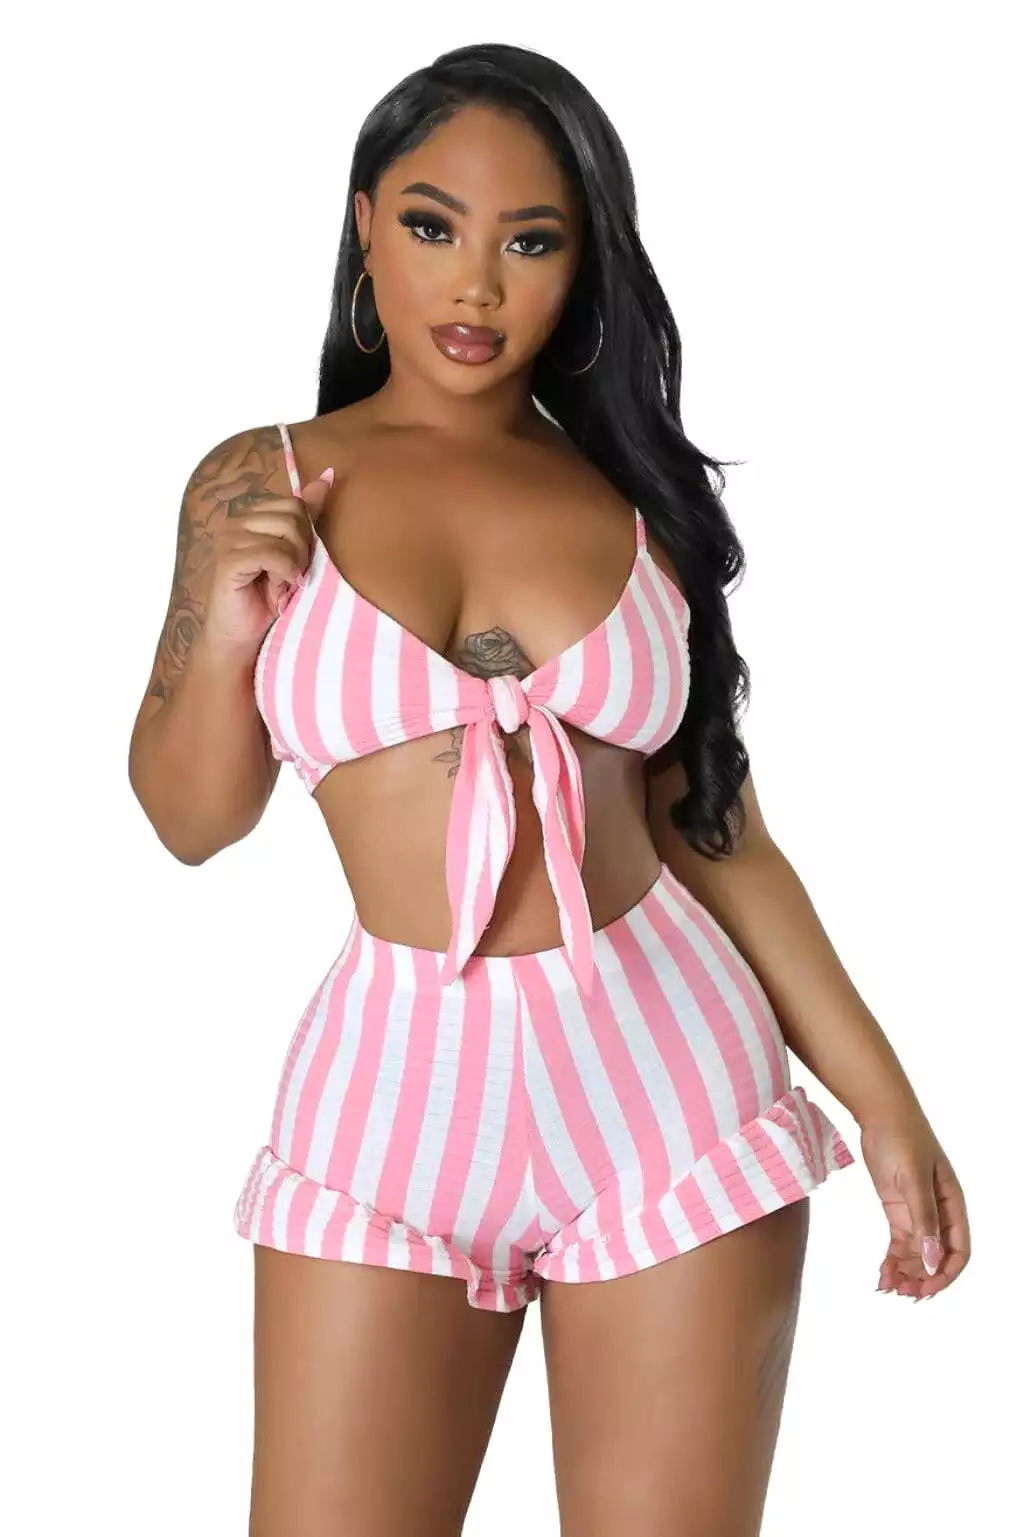 Better Believe It Shorts Outfift Set - Pink